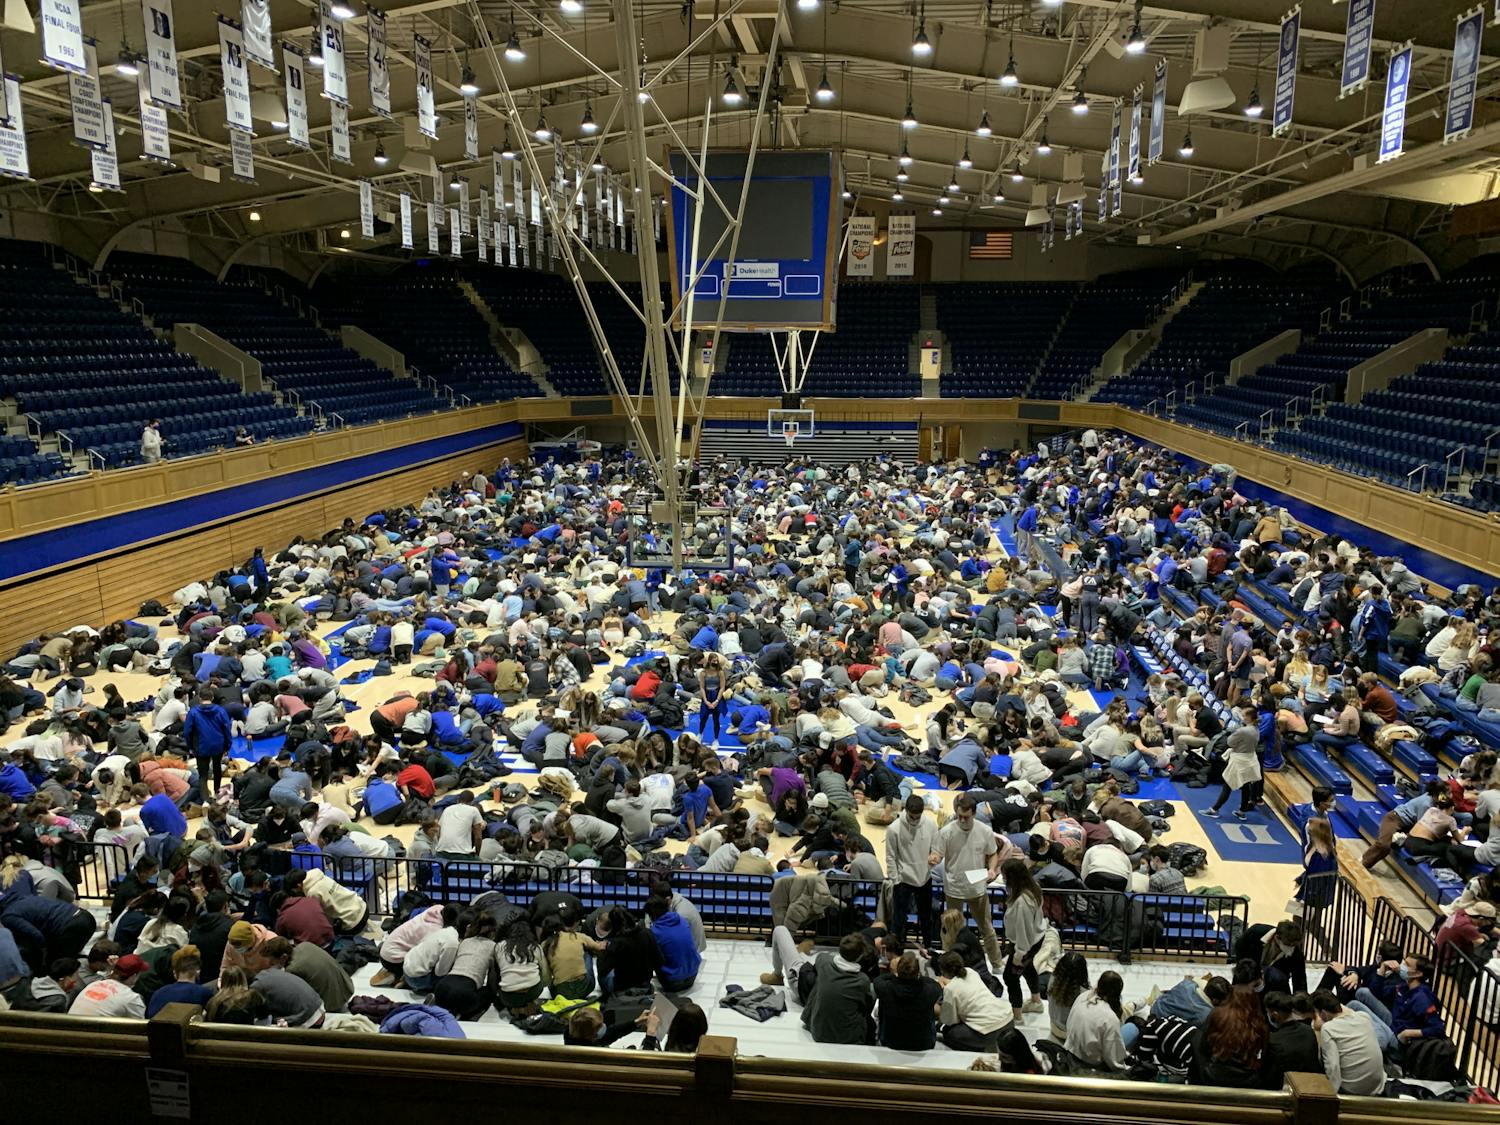 Students first gathered in Cameron Indoor Stadium in January to take a test to get a tenting spot in Krzyzewskiville. 